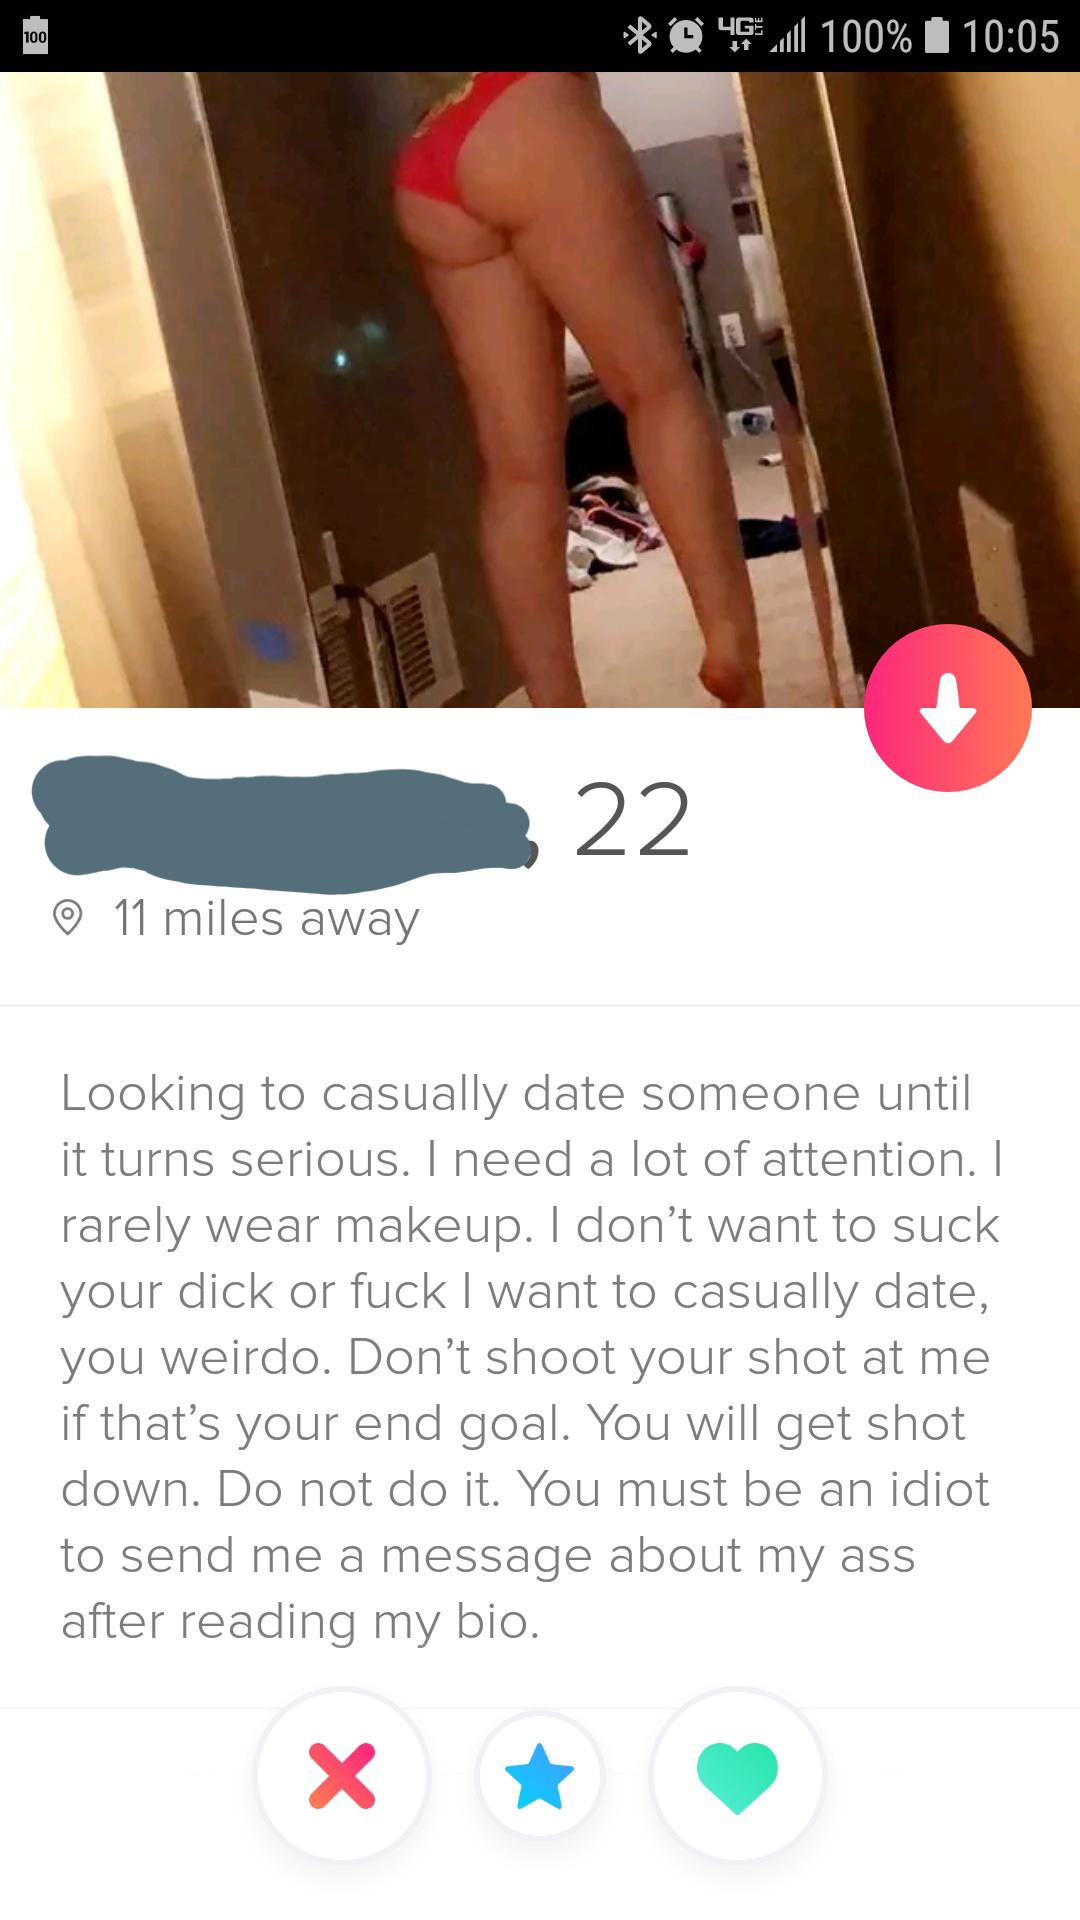 shameless tinder - Looking to casually date someone until it turns serious. I need a lot of attention. I rarely wear makeup. I don't want to suck your dick or fuck I want to casually date, you weirdo. Don't shoot your shot at me if that'